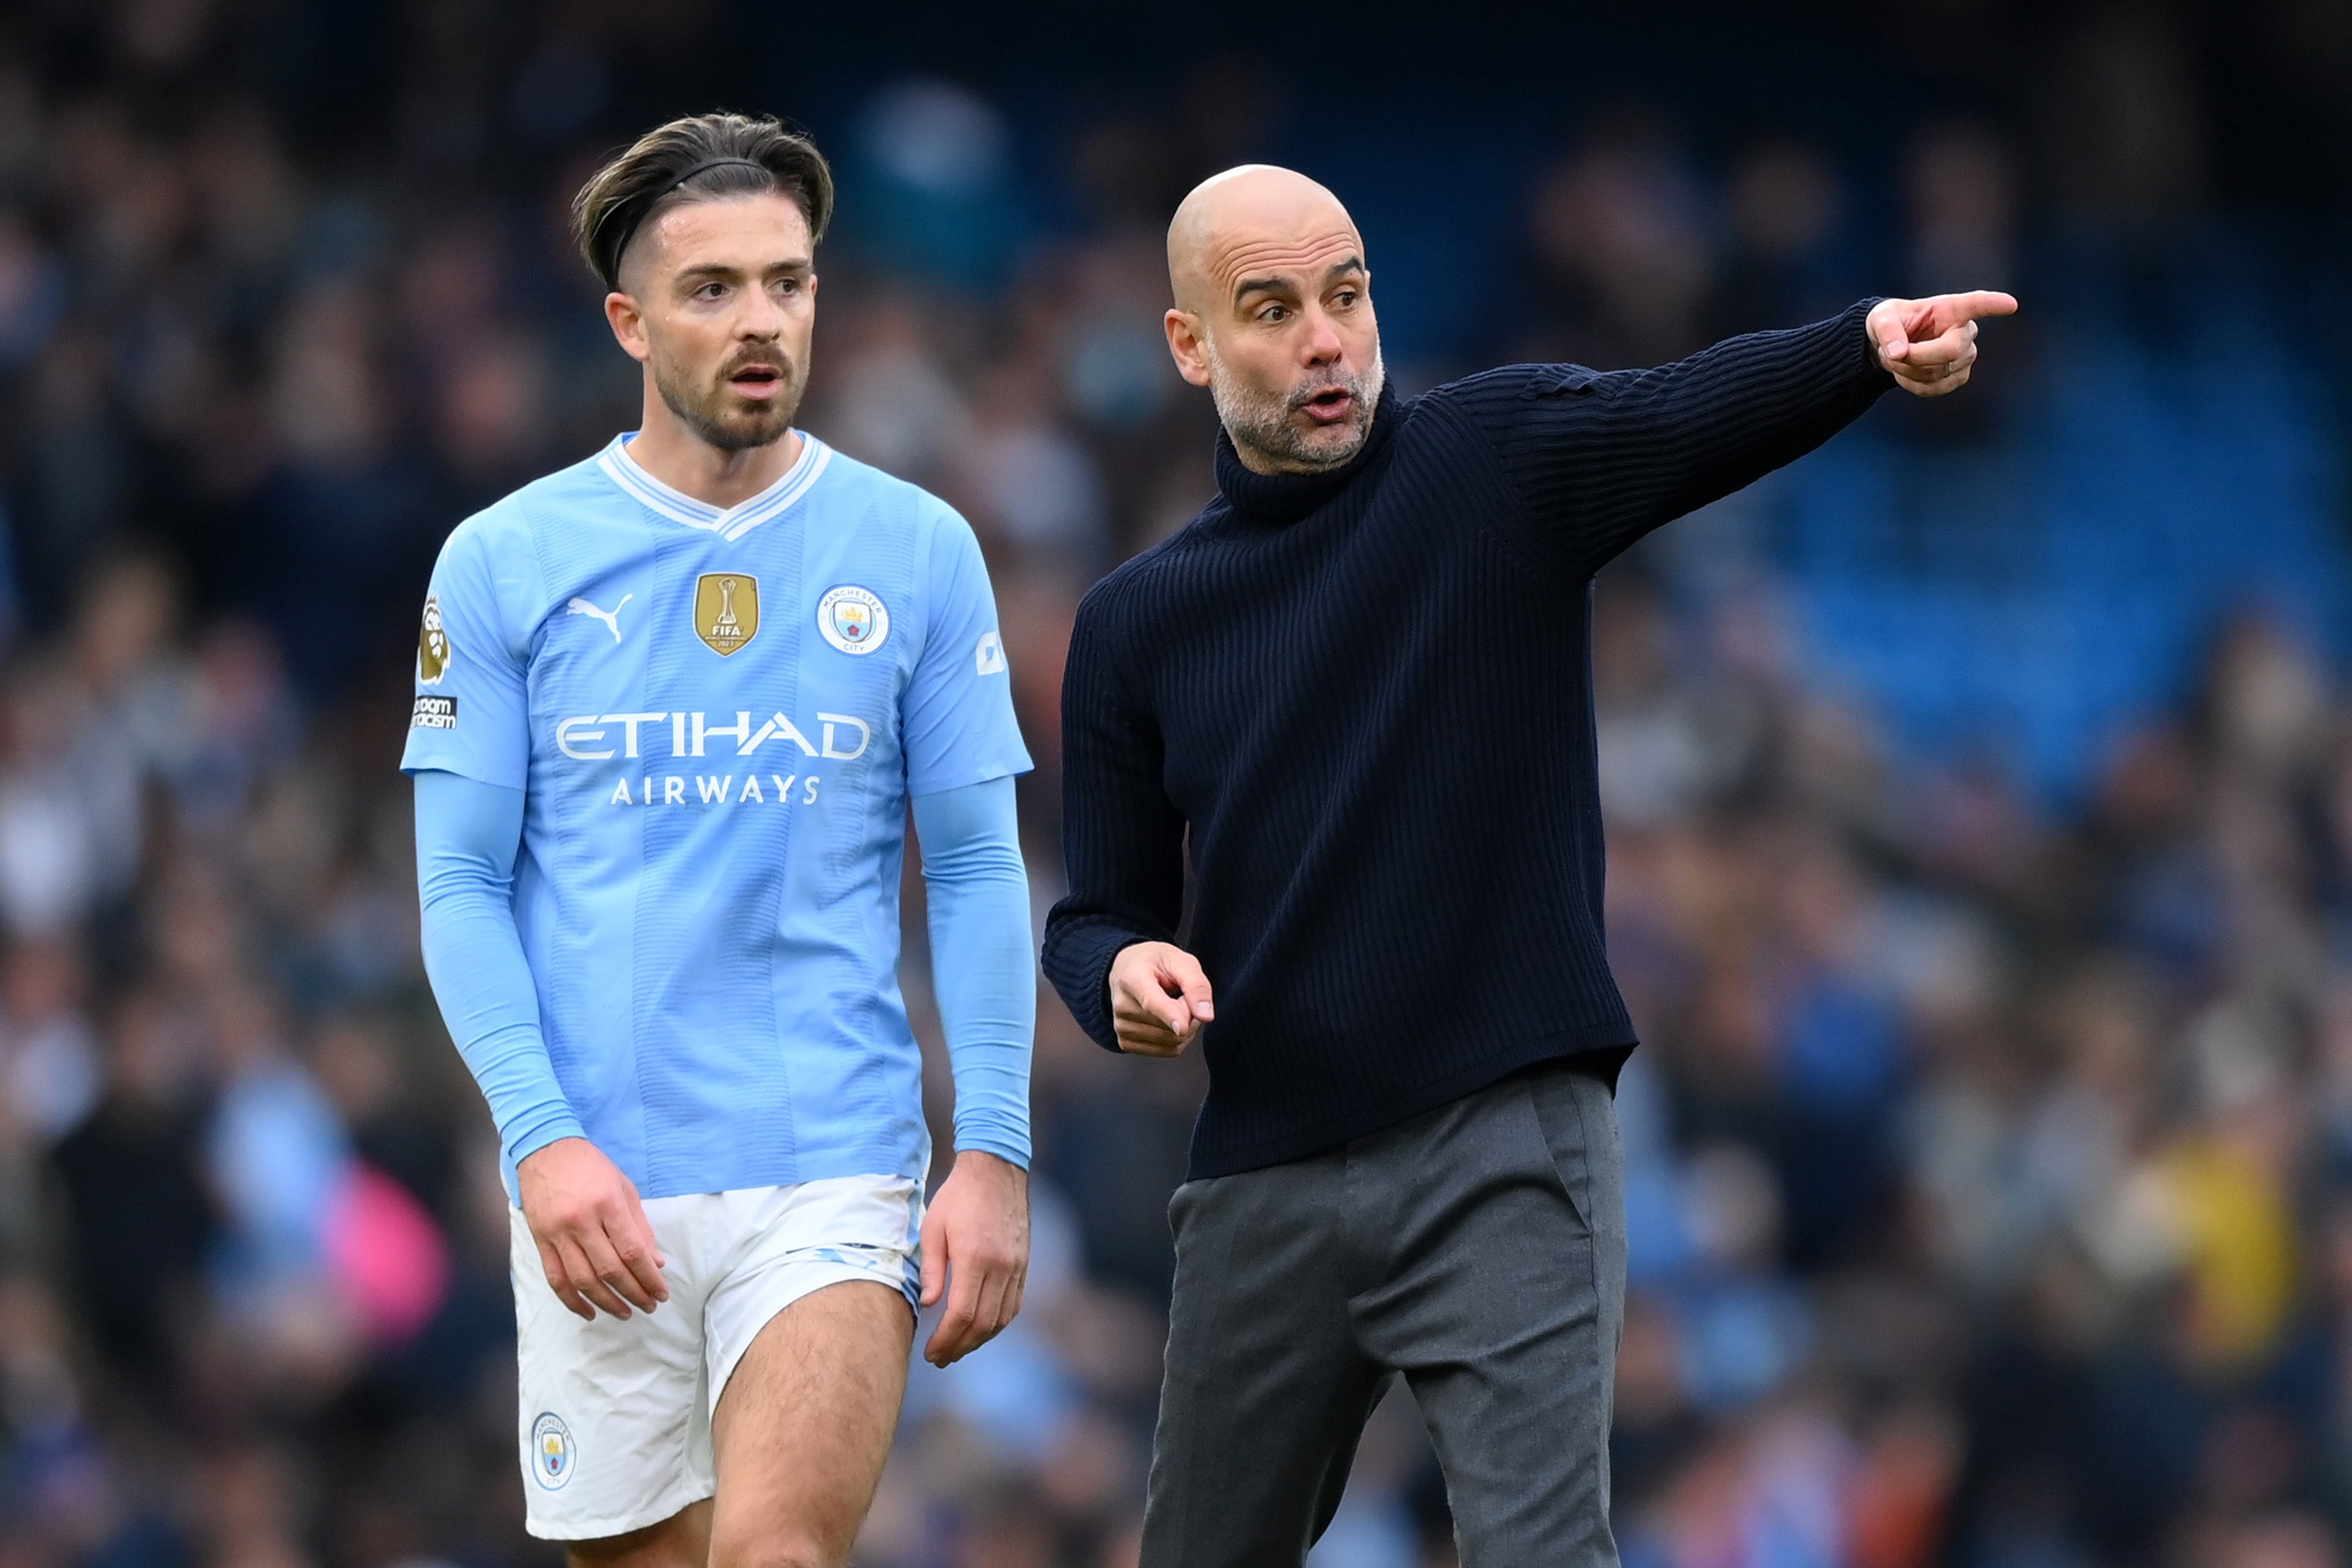 Guardiola in conversation with Grealish